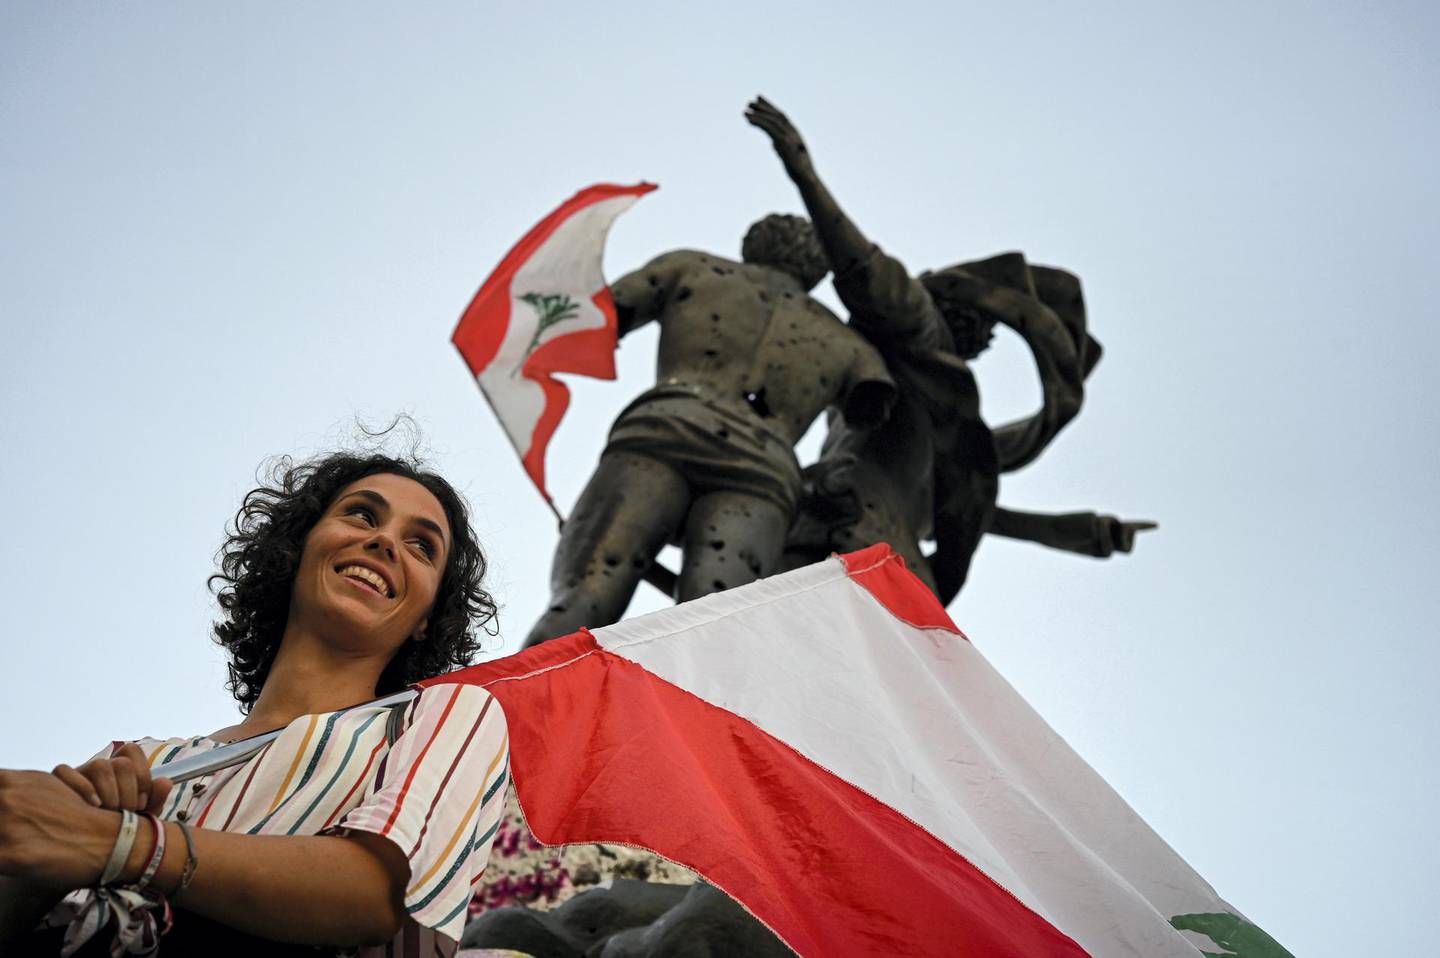 Feyrouz Abou Hassan with her giant Lebanese flag during protests in Beirut in November 2019. Finbar Anderson for The National